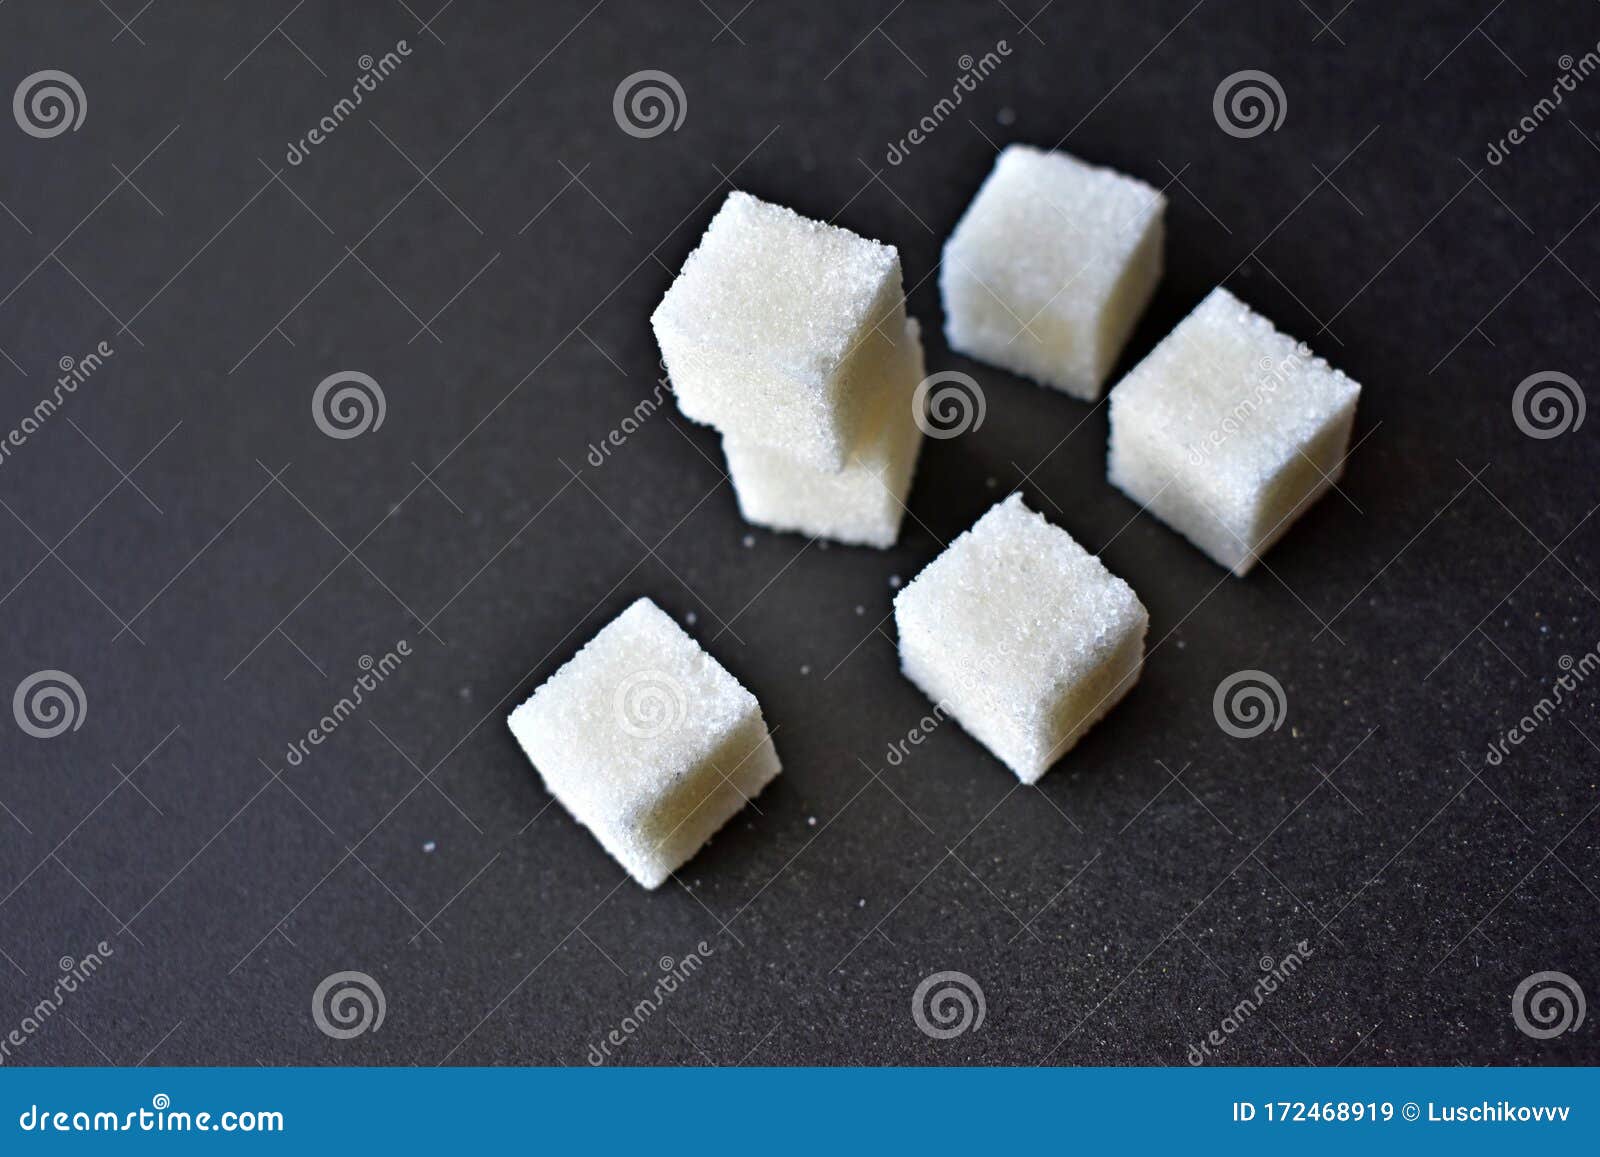 Square Pieces of Refined Sugar on a Black Background Stock Image ...